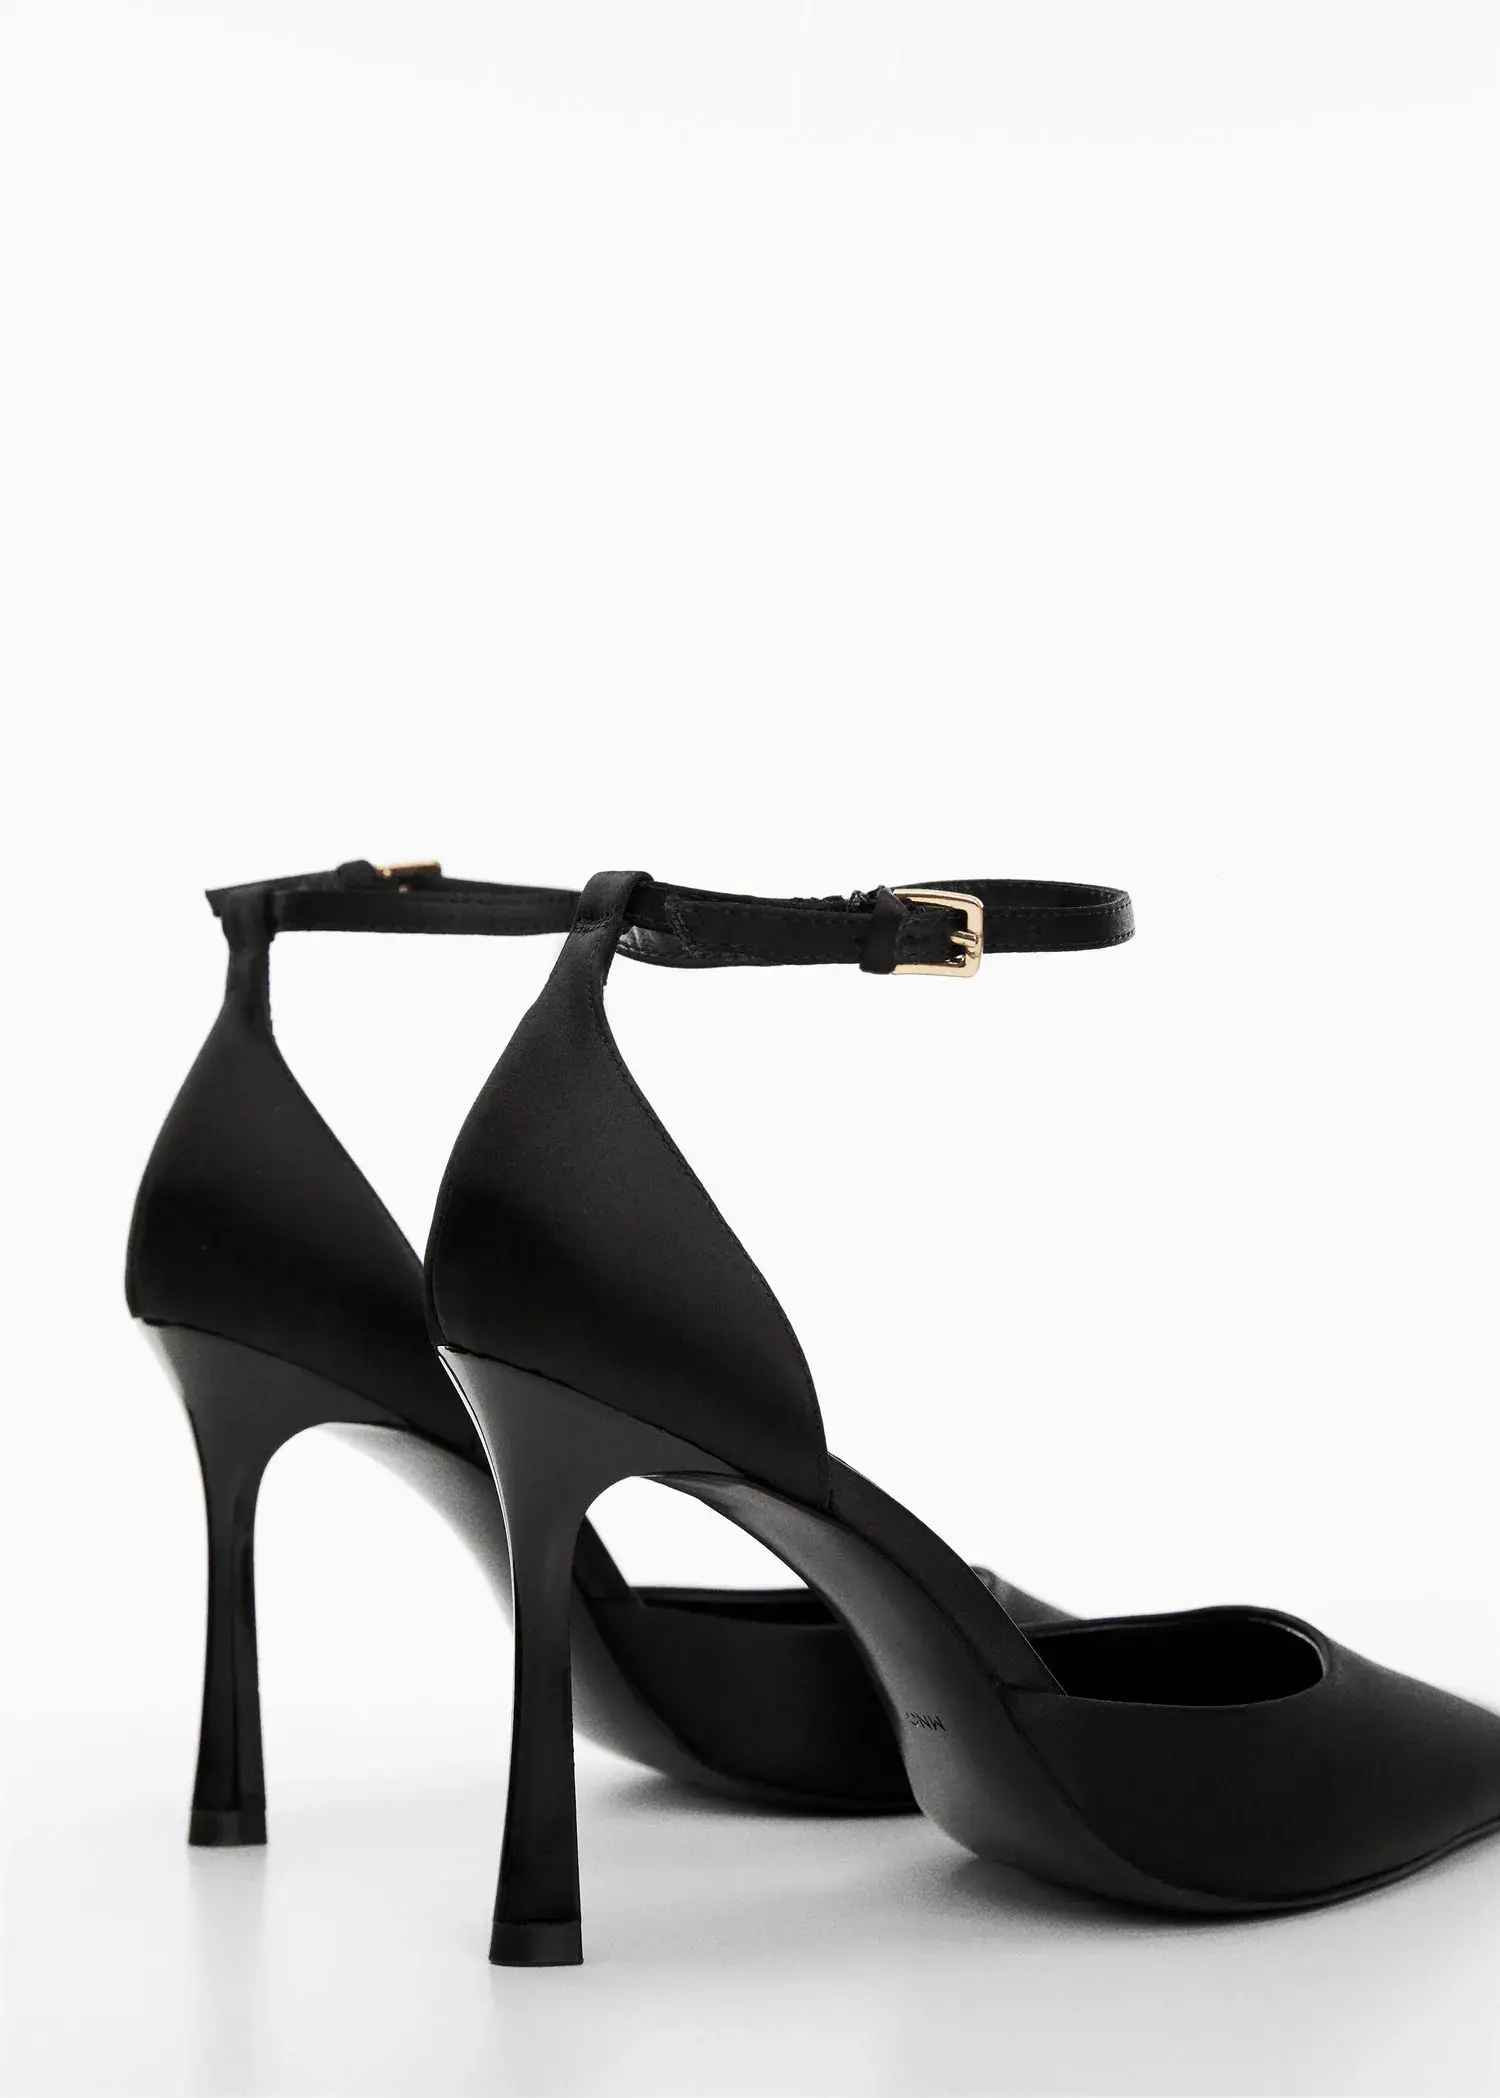 Mango Ankle-cuff heel shoes. 3